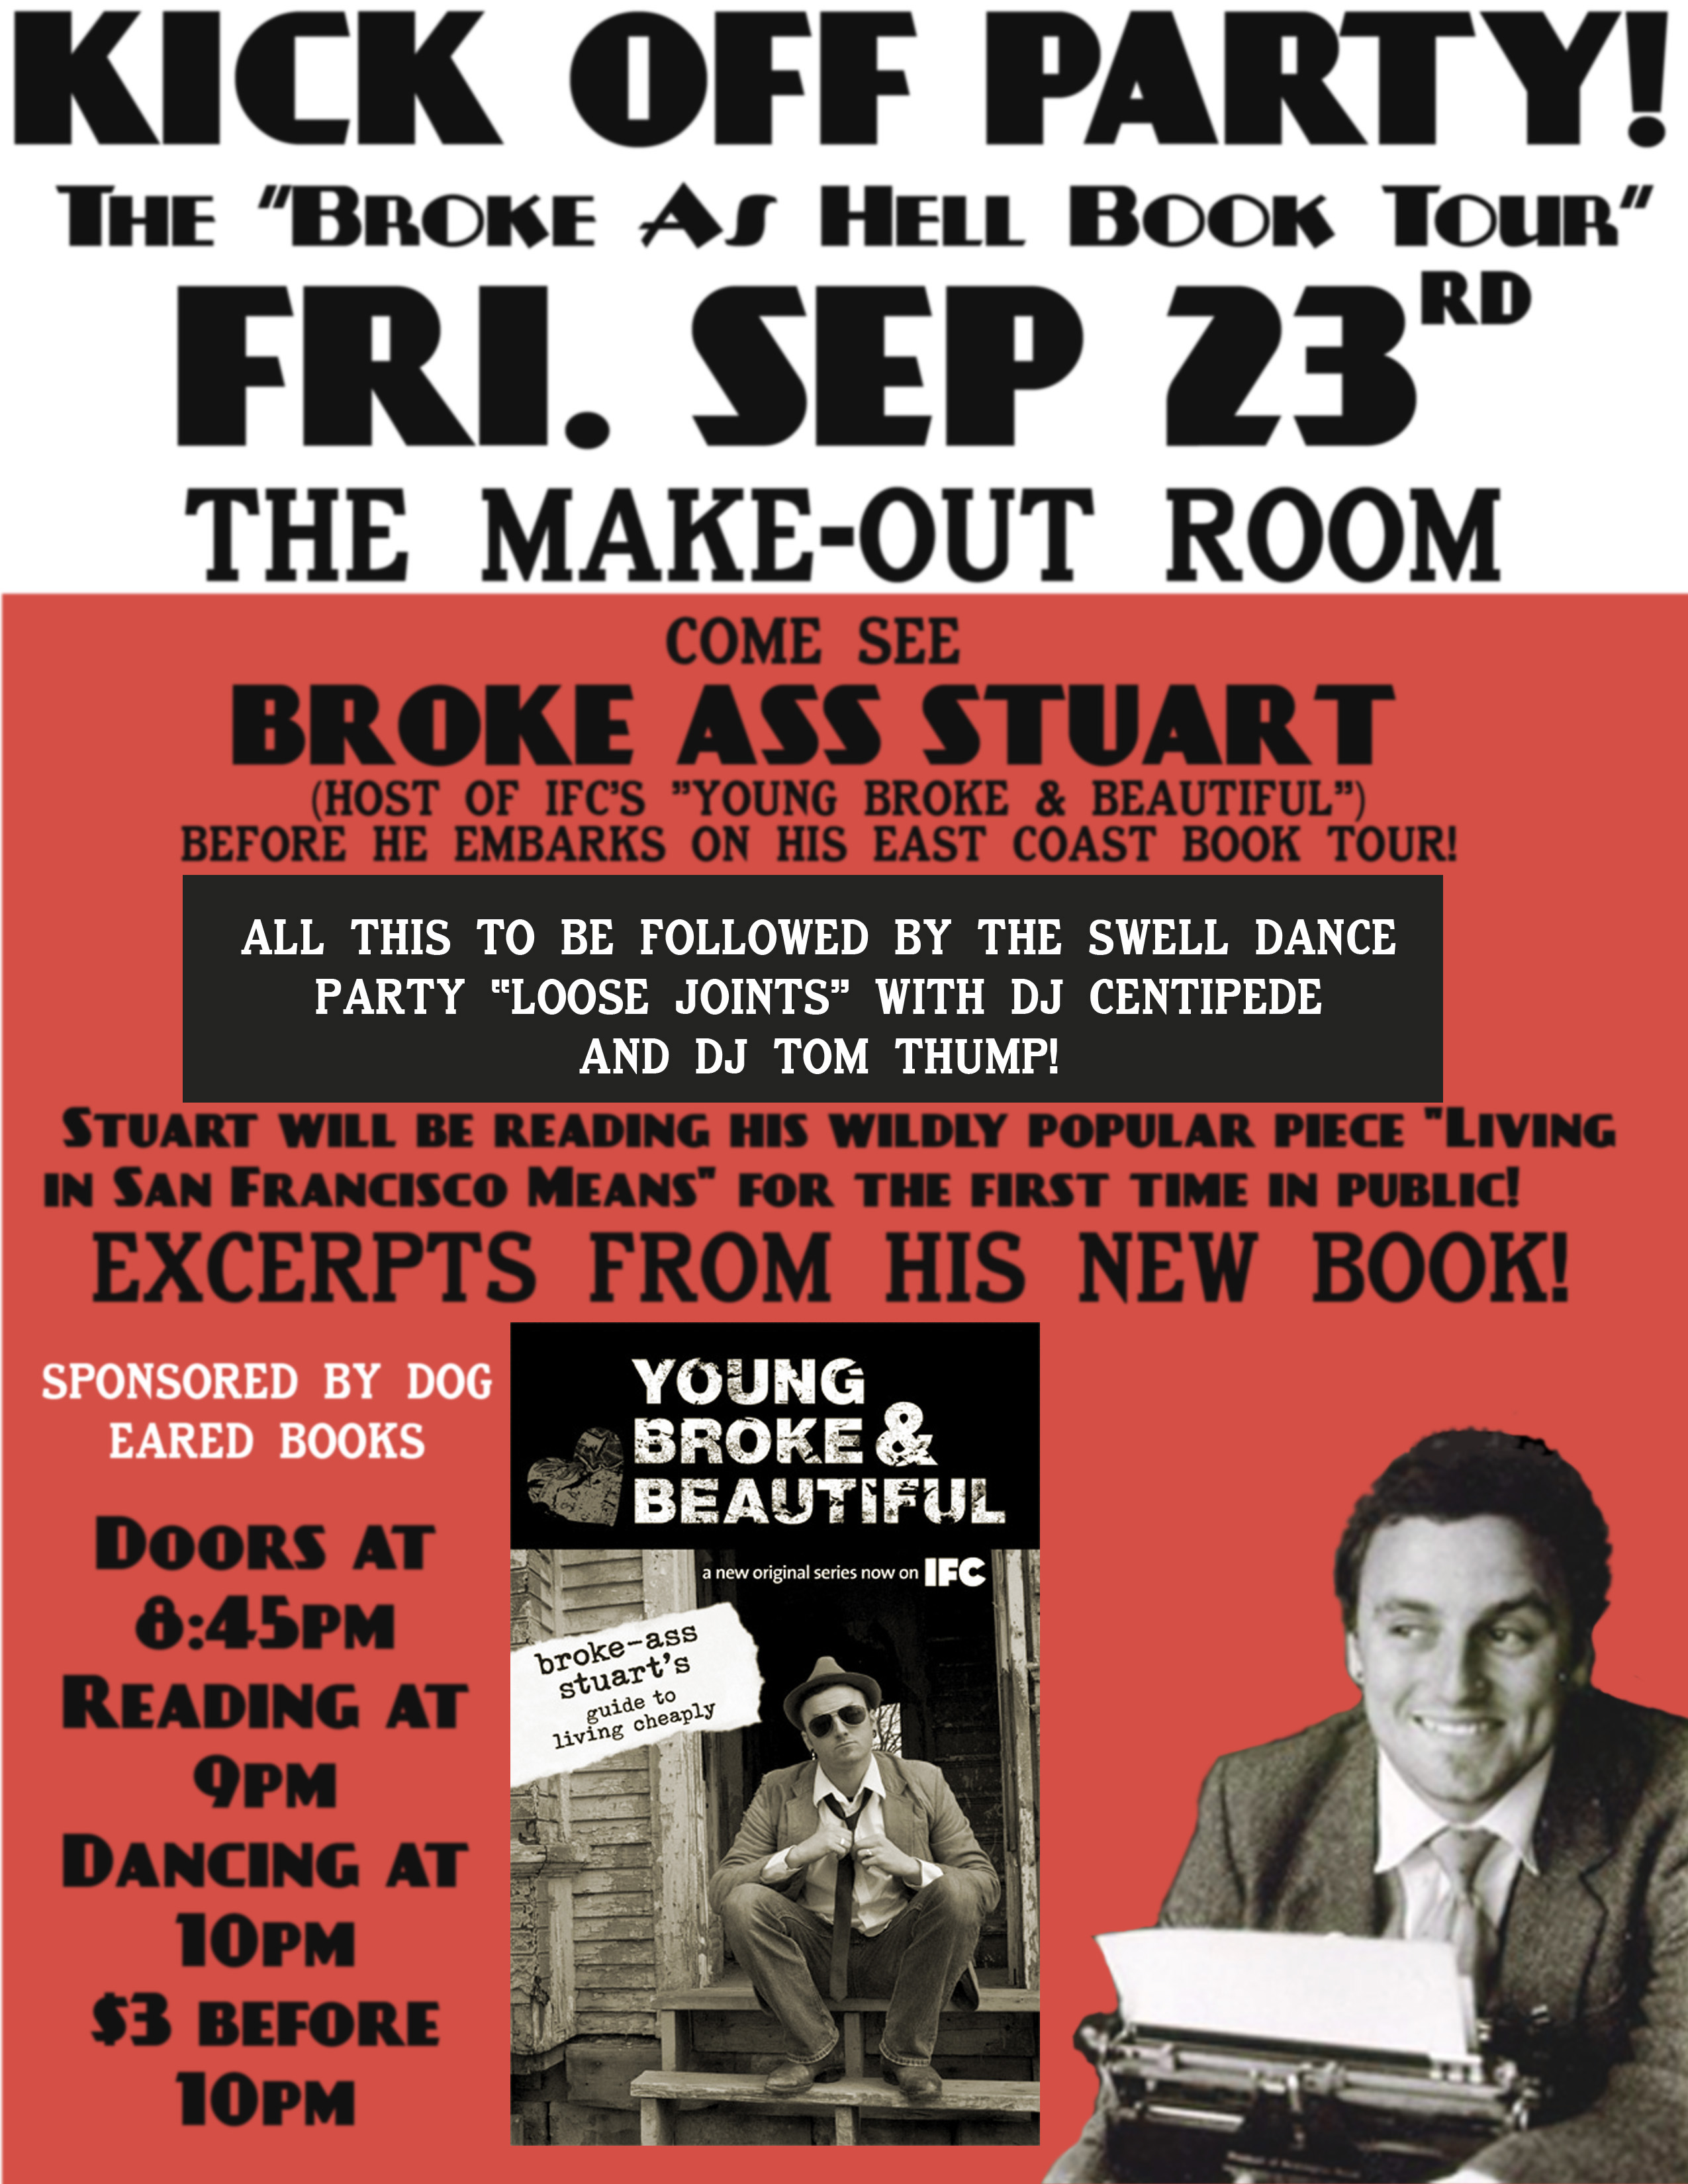 Broke Ass Stuart S Broke Ass Book Tour Kicks Off Tonight At The Make Out Room Mission Mission